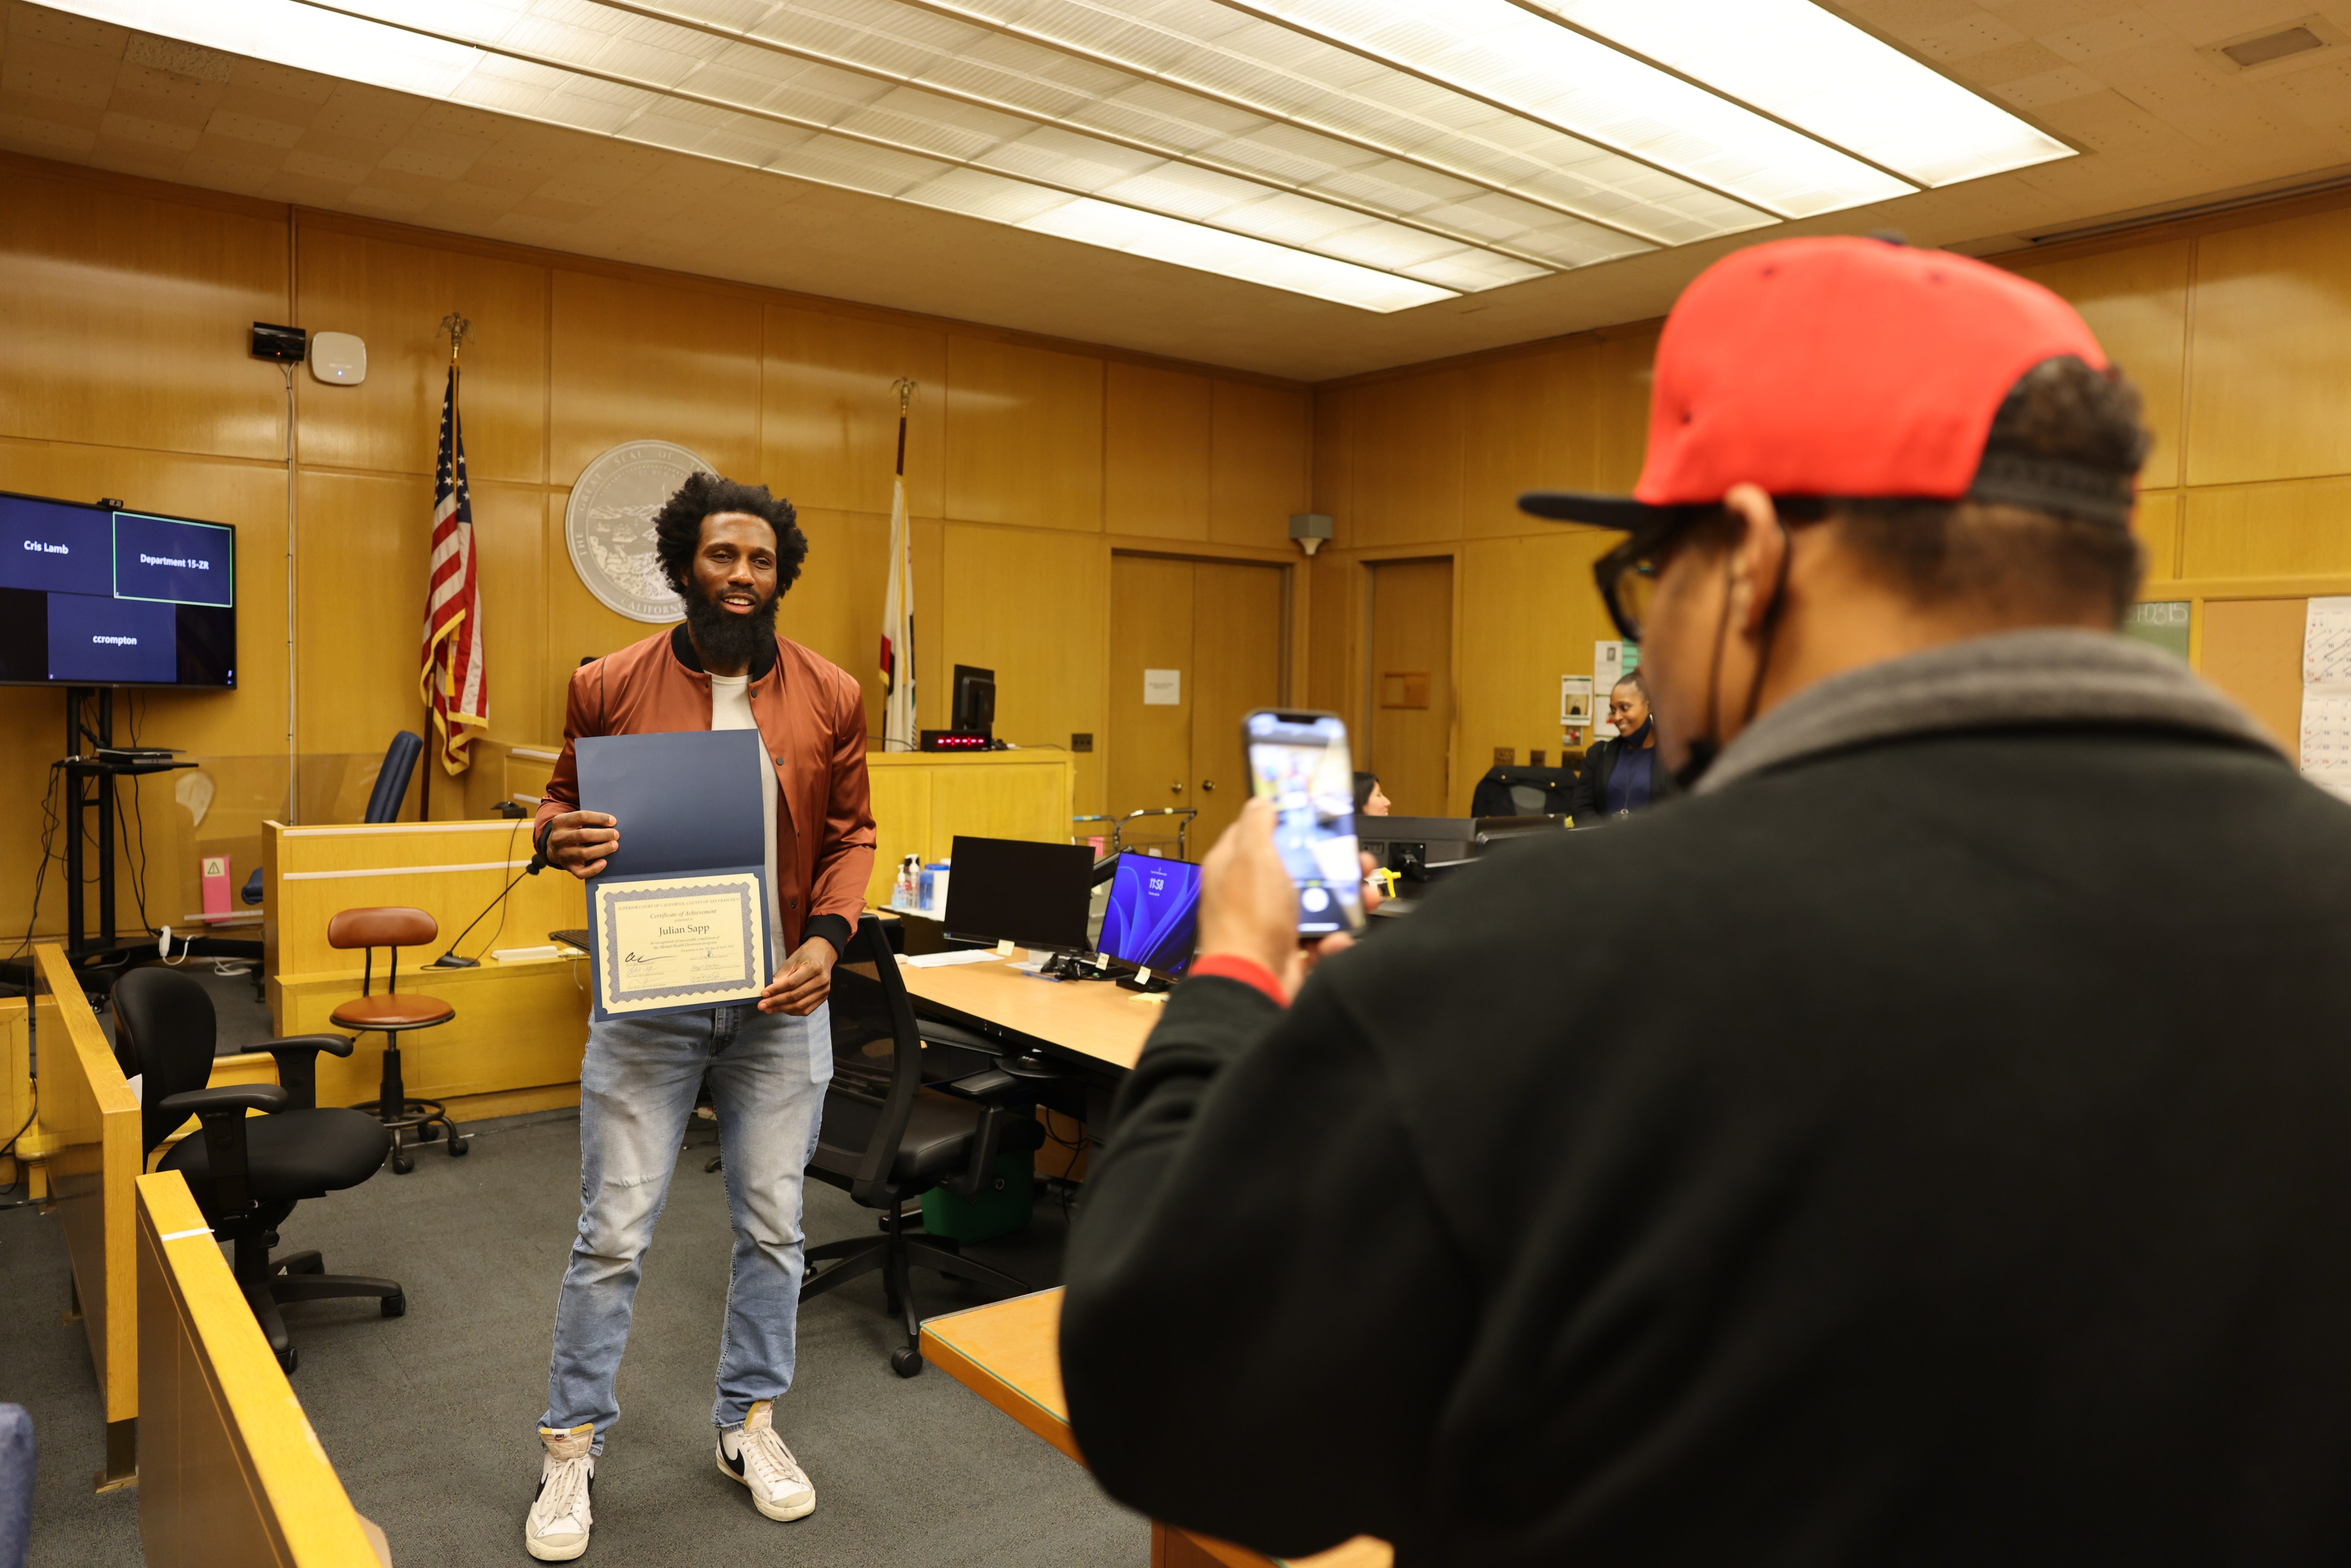 This SF Court Keeps People Out of Prison. Meet Its Newest Alumni